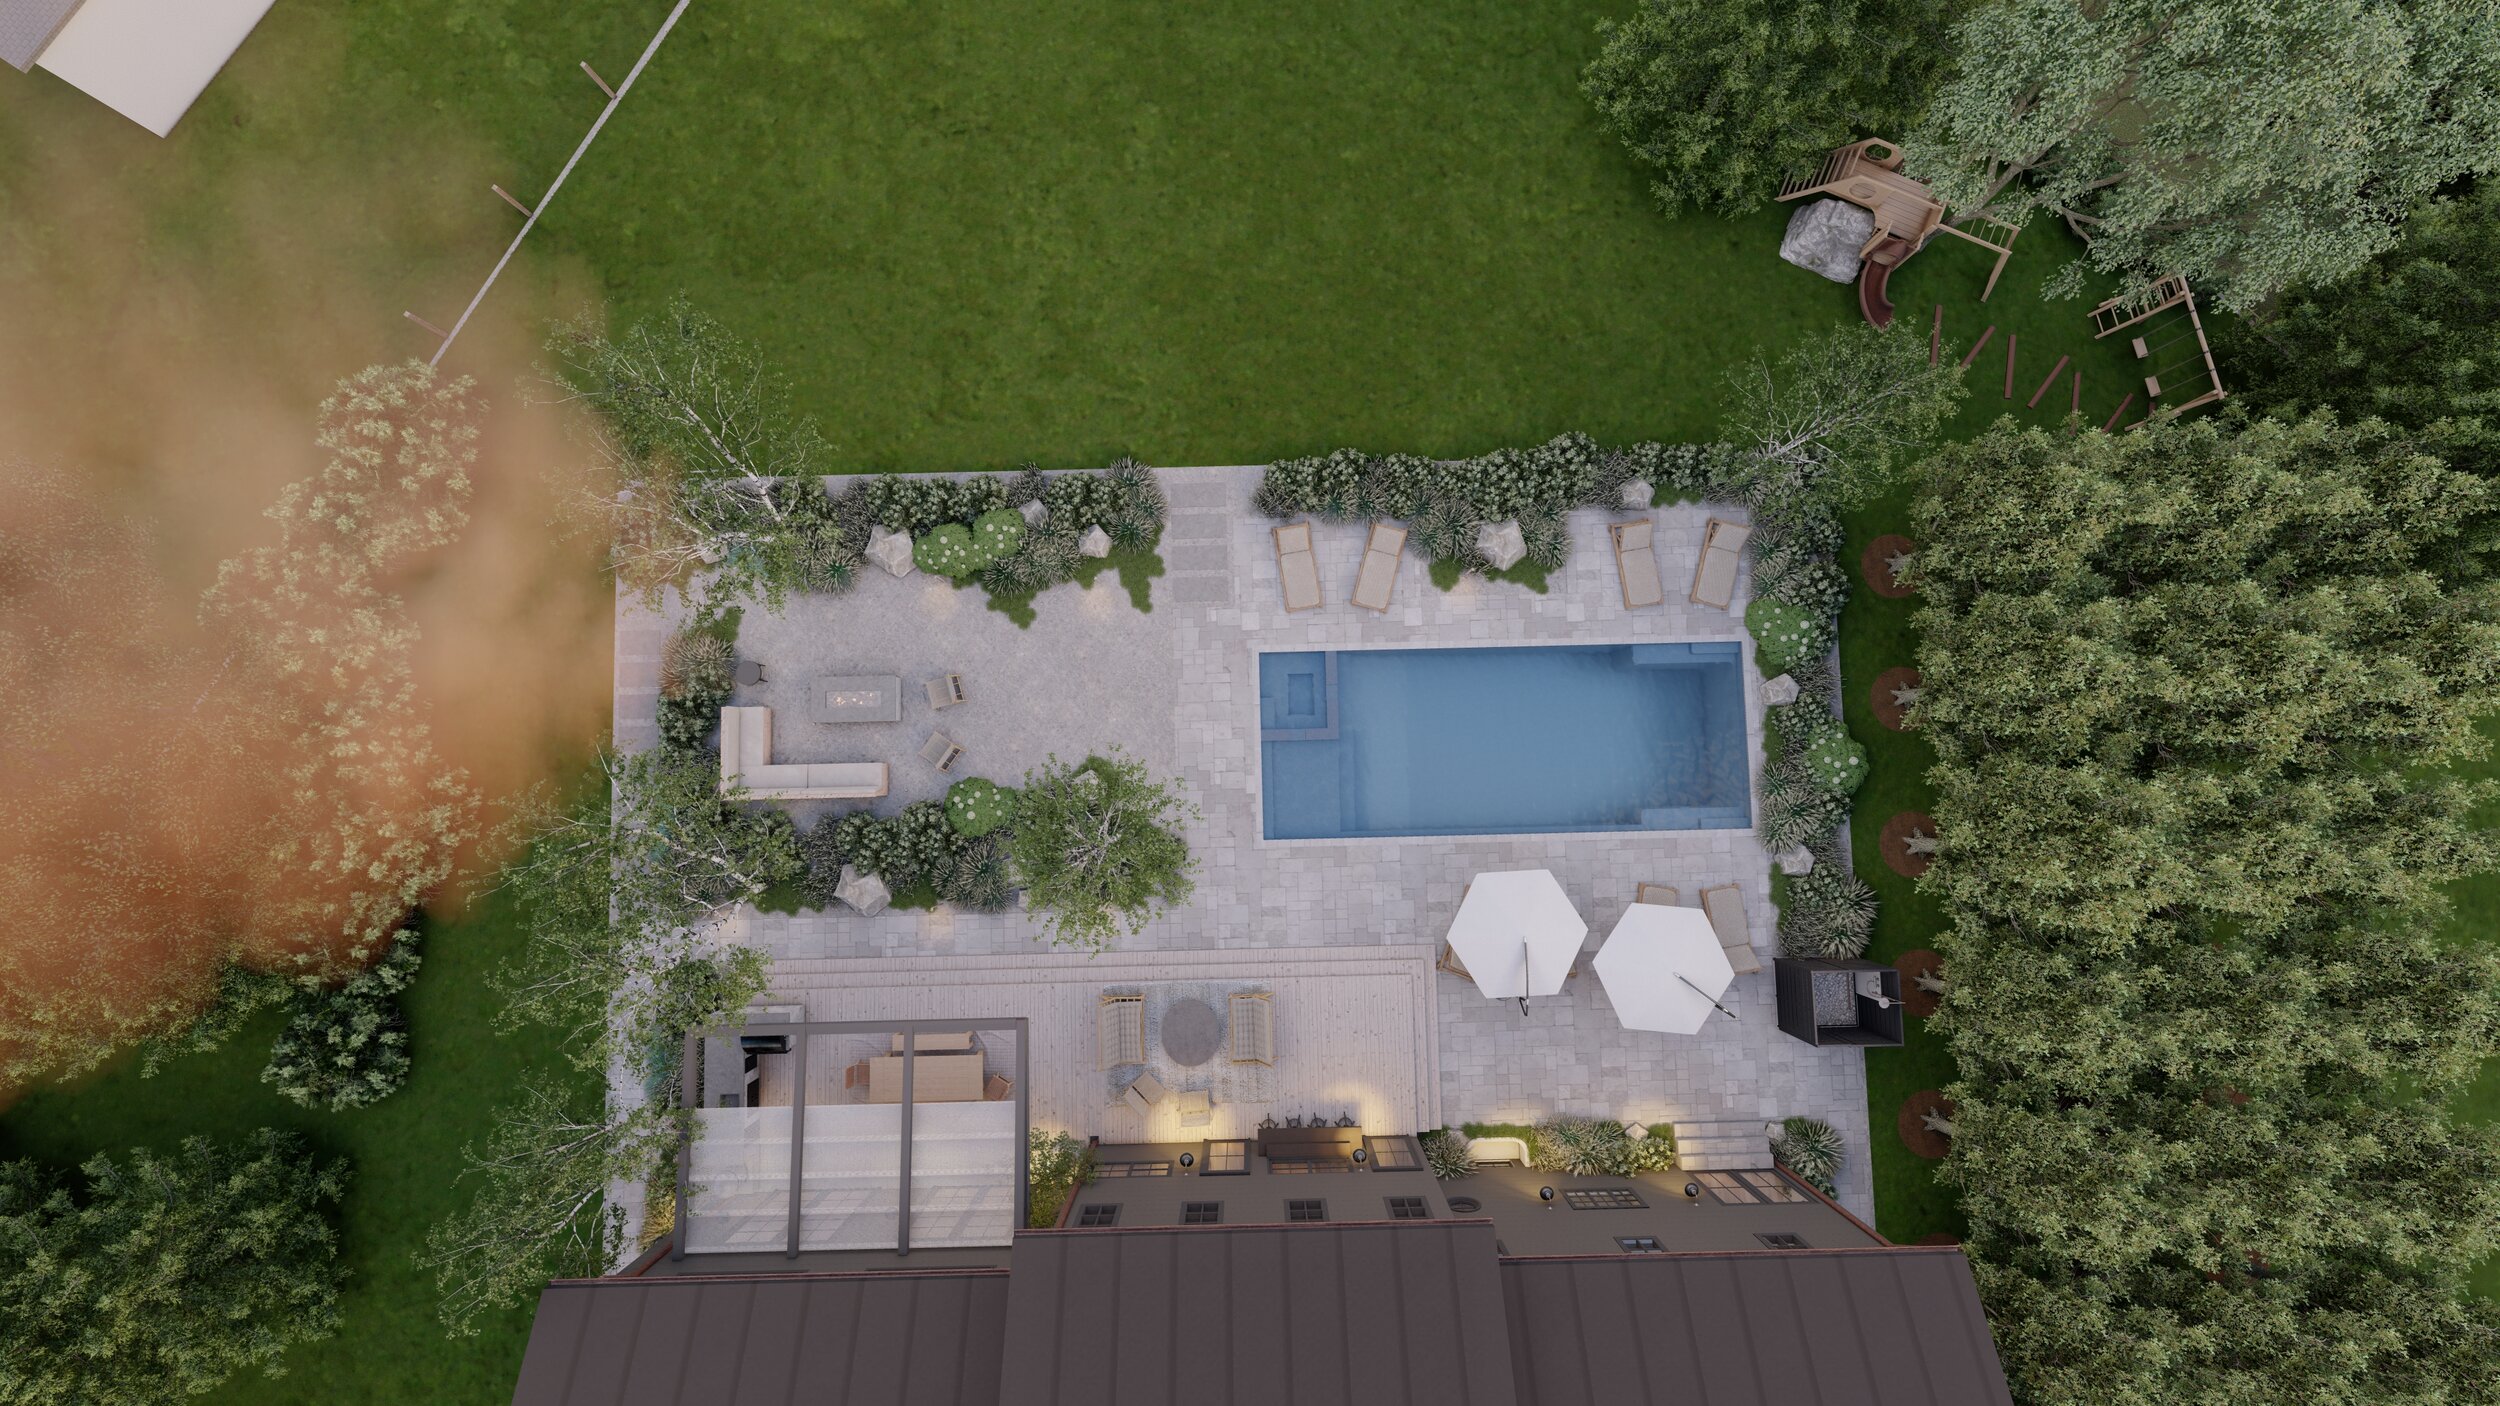 Overhead view of backyard with fire pit, outdoor kitchen, swimming pool